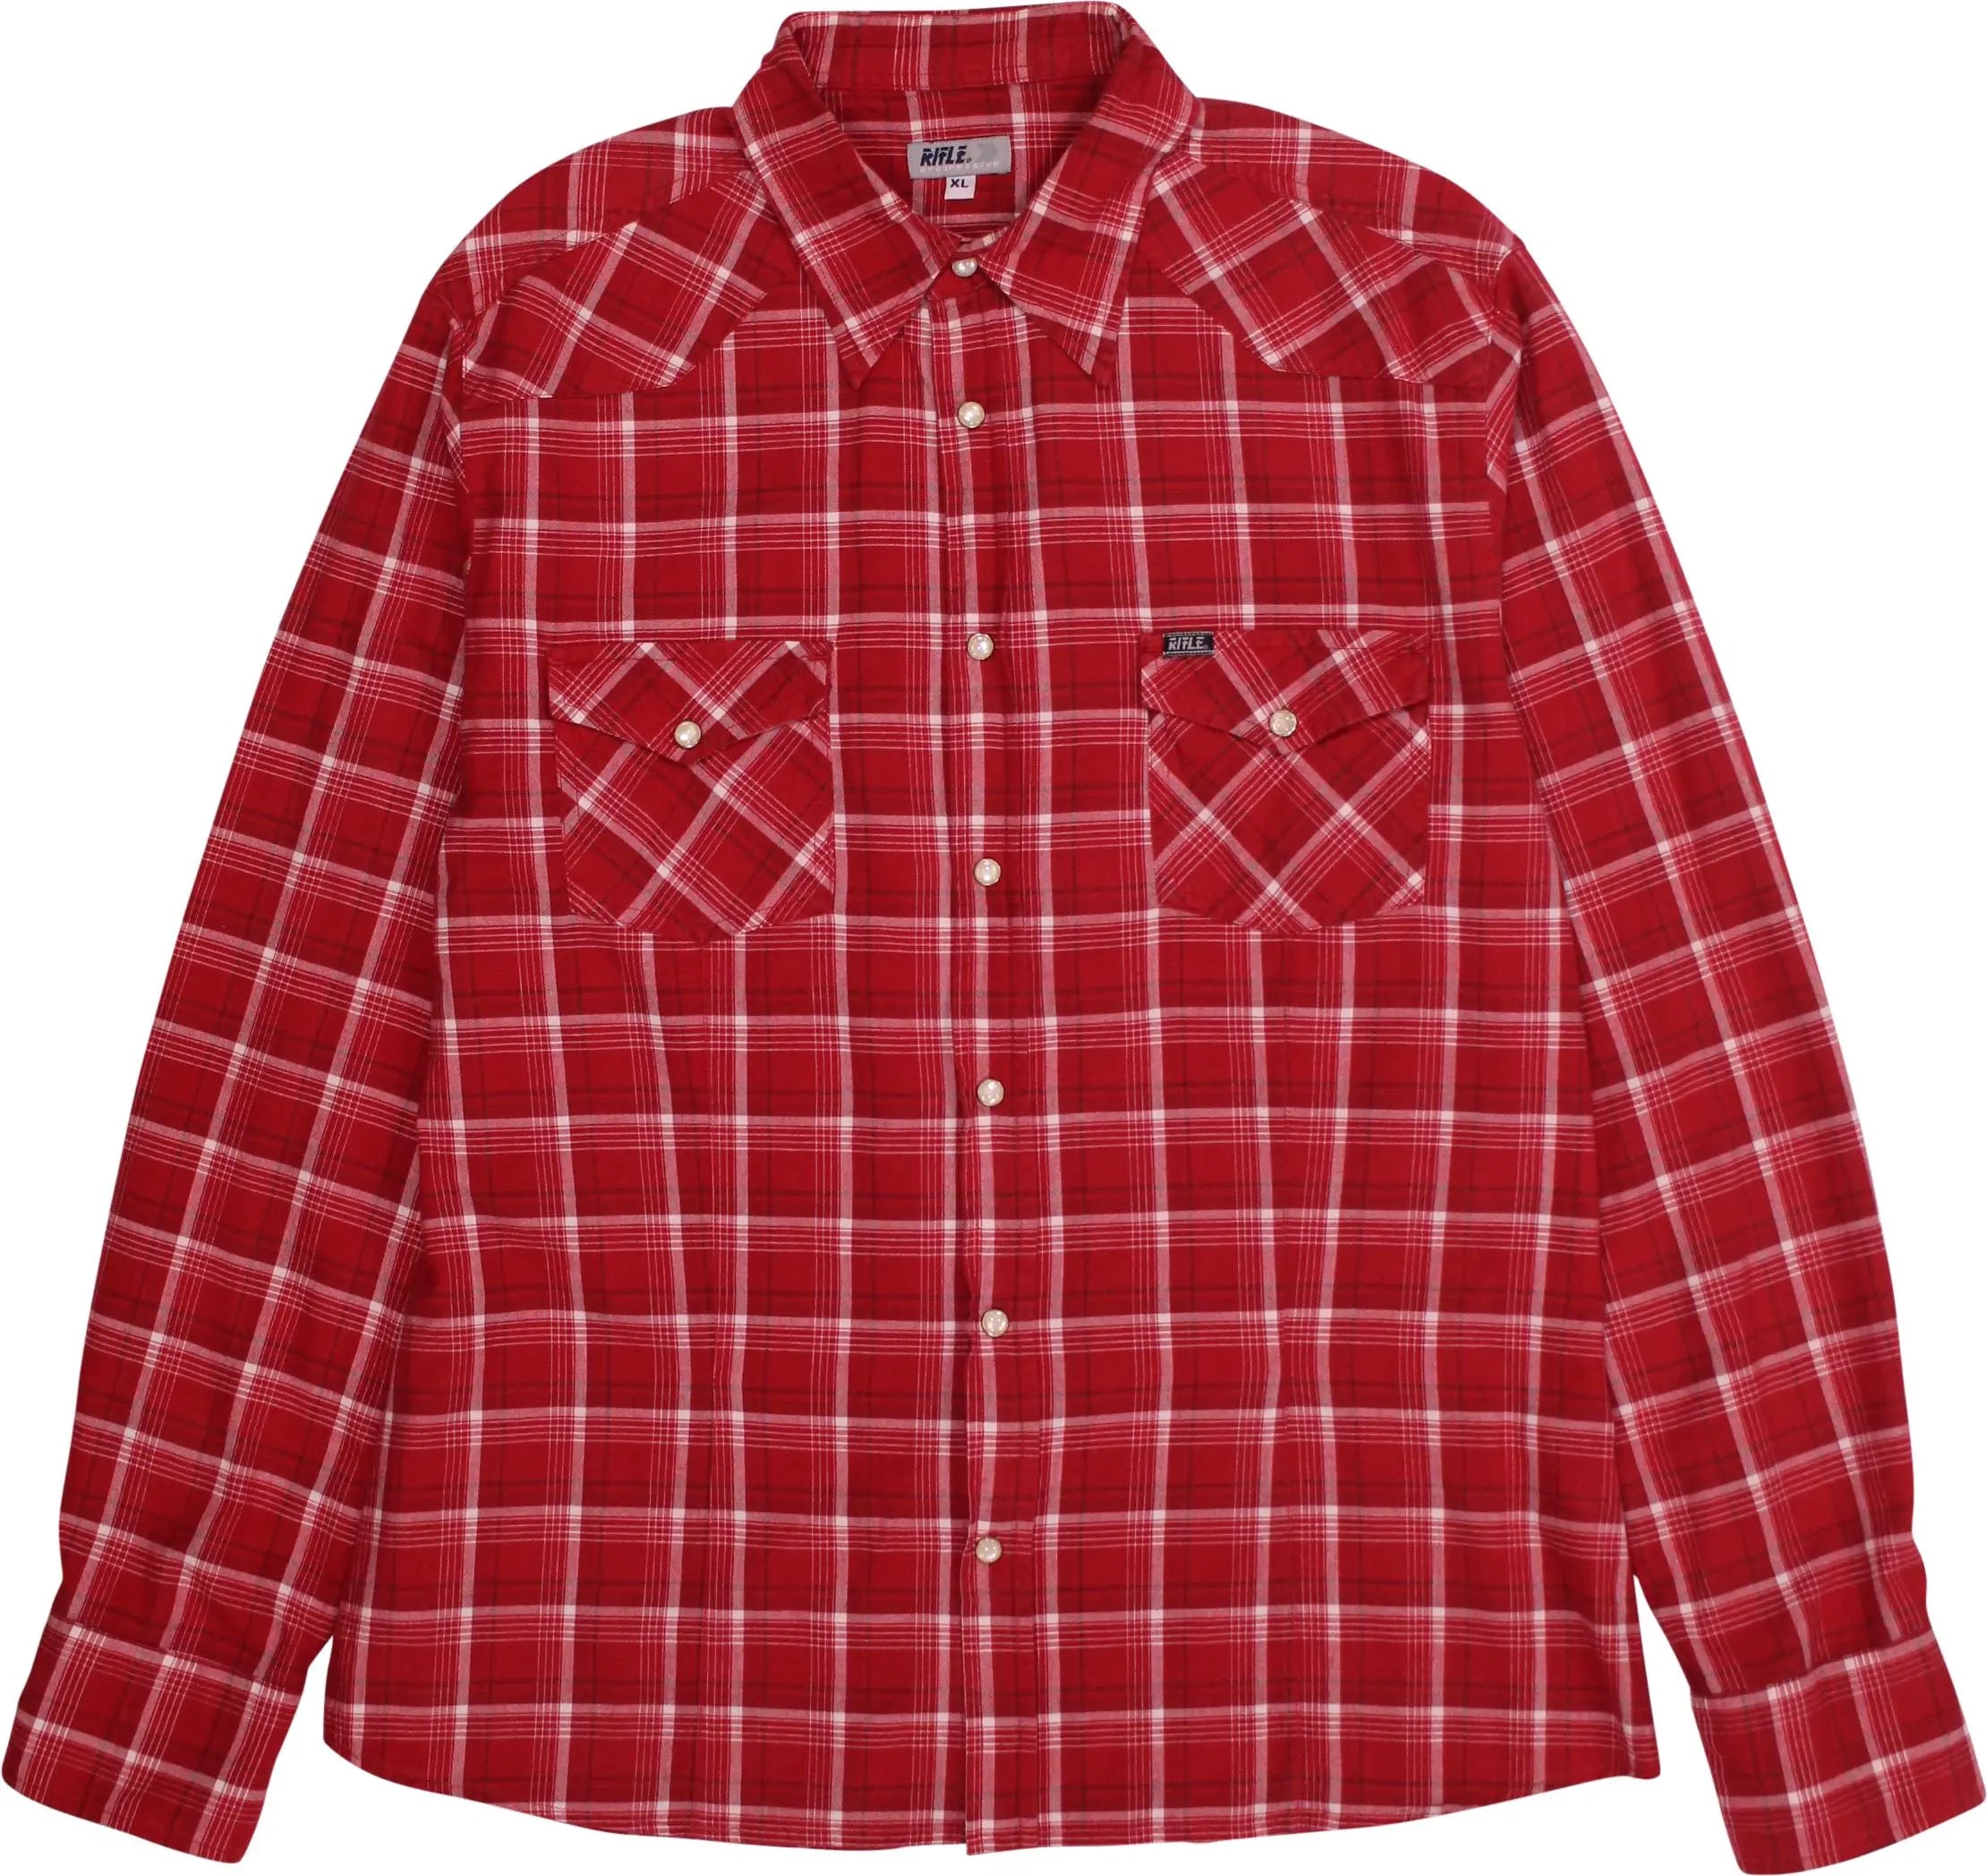 Rifle - Checked Shirt by Rifle- ThriftTale.com - Vintage and second handclothing